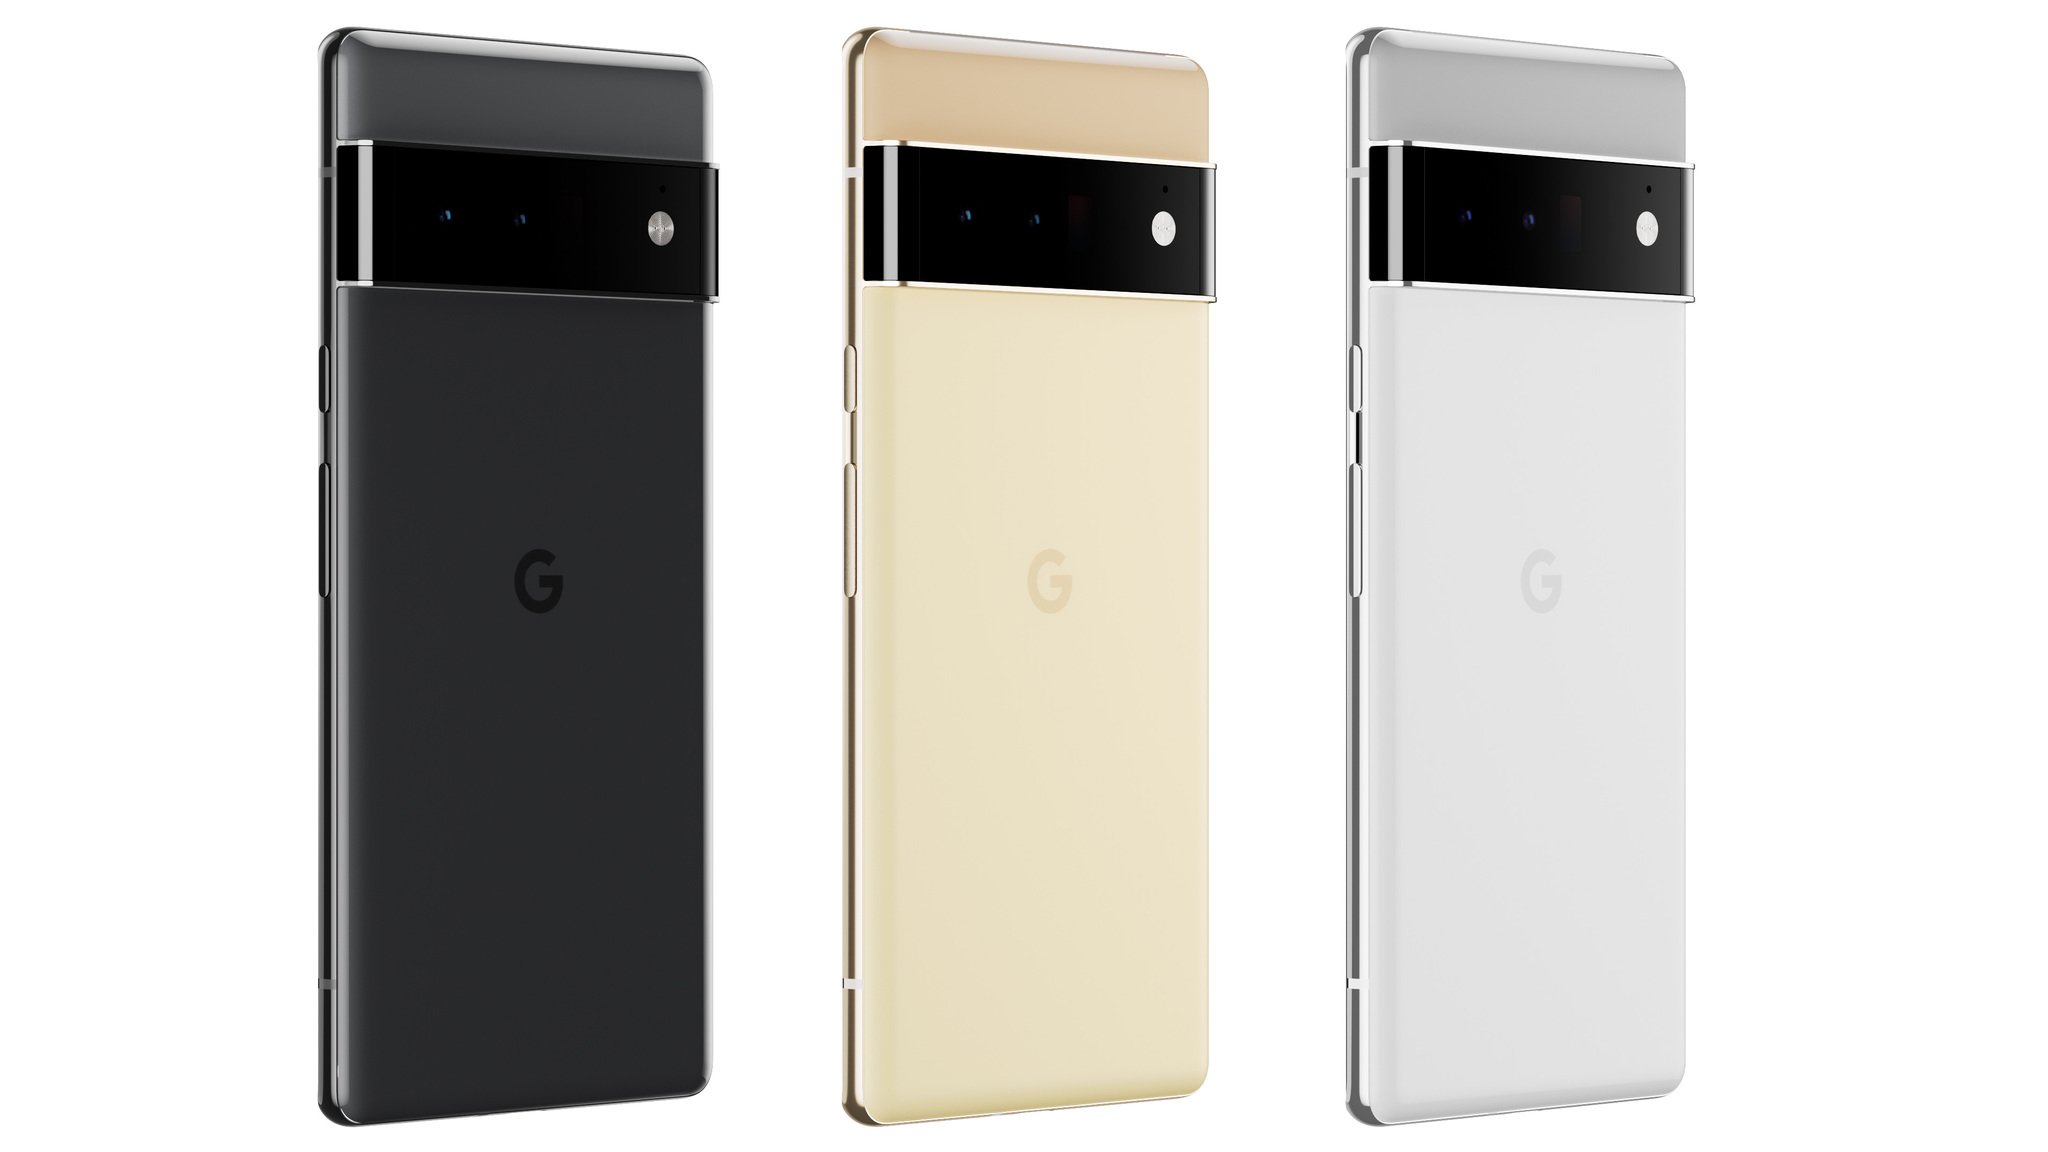 When it comes to the Pixel 6 colors, AC readers prefer the classic to the fantastic